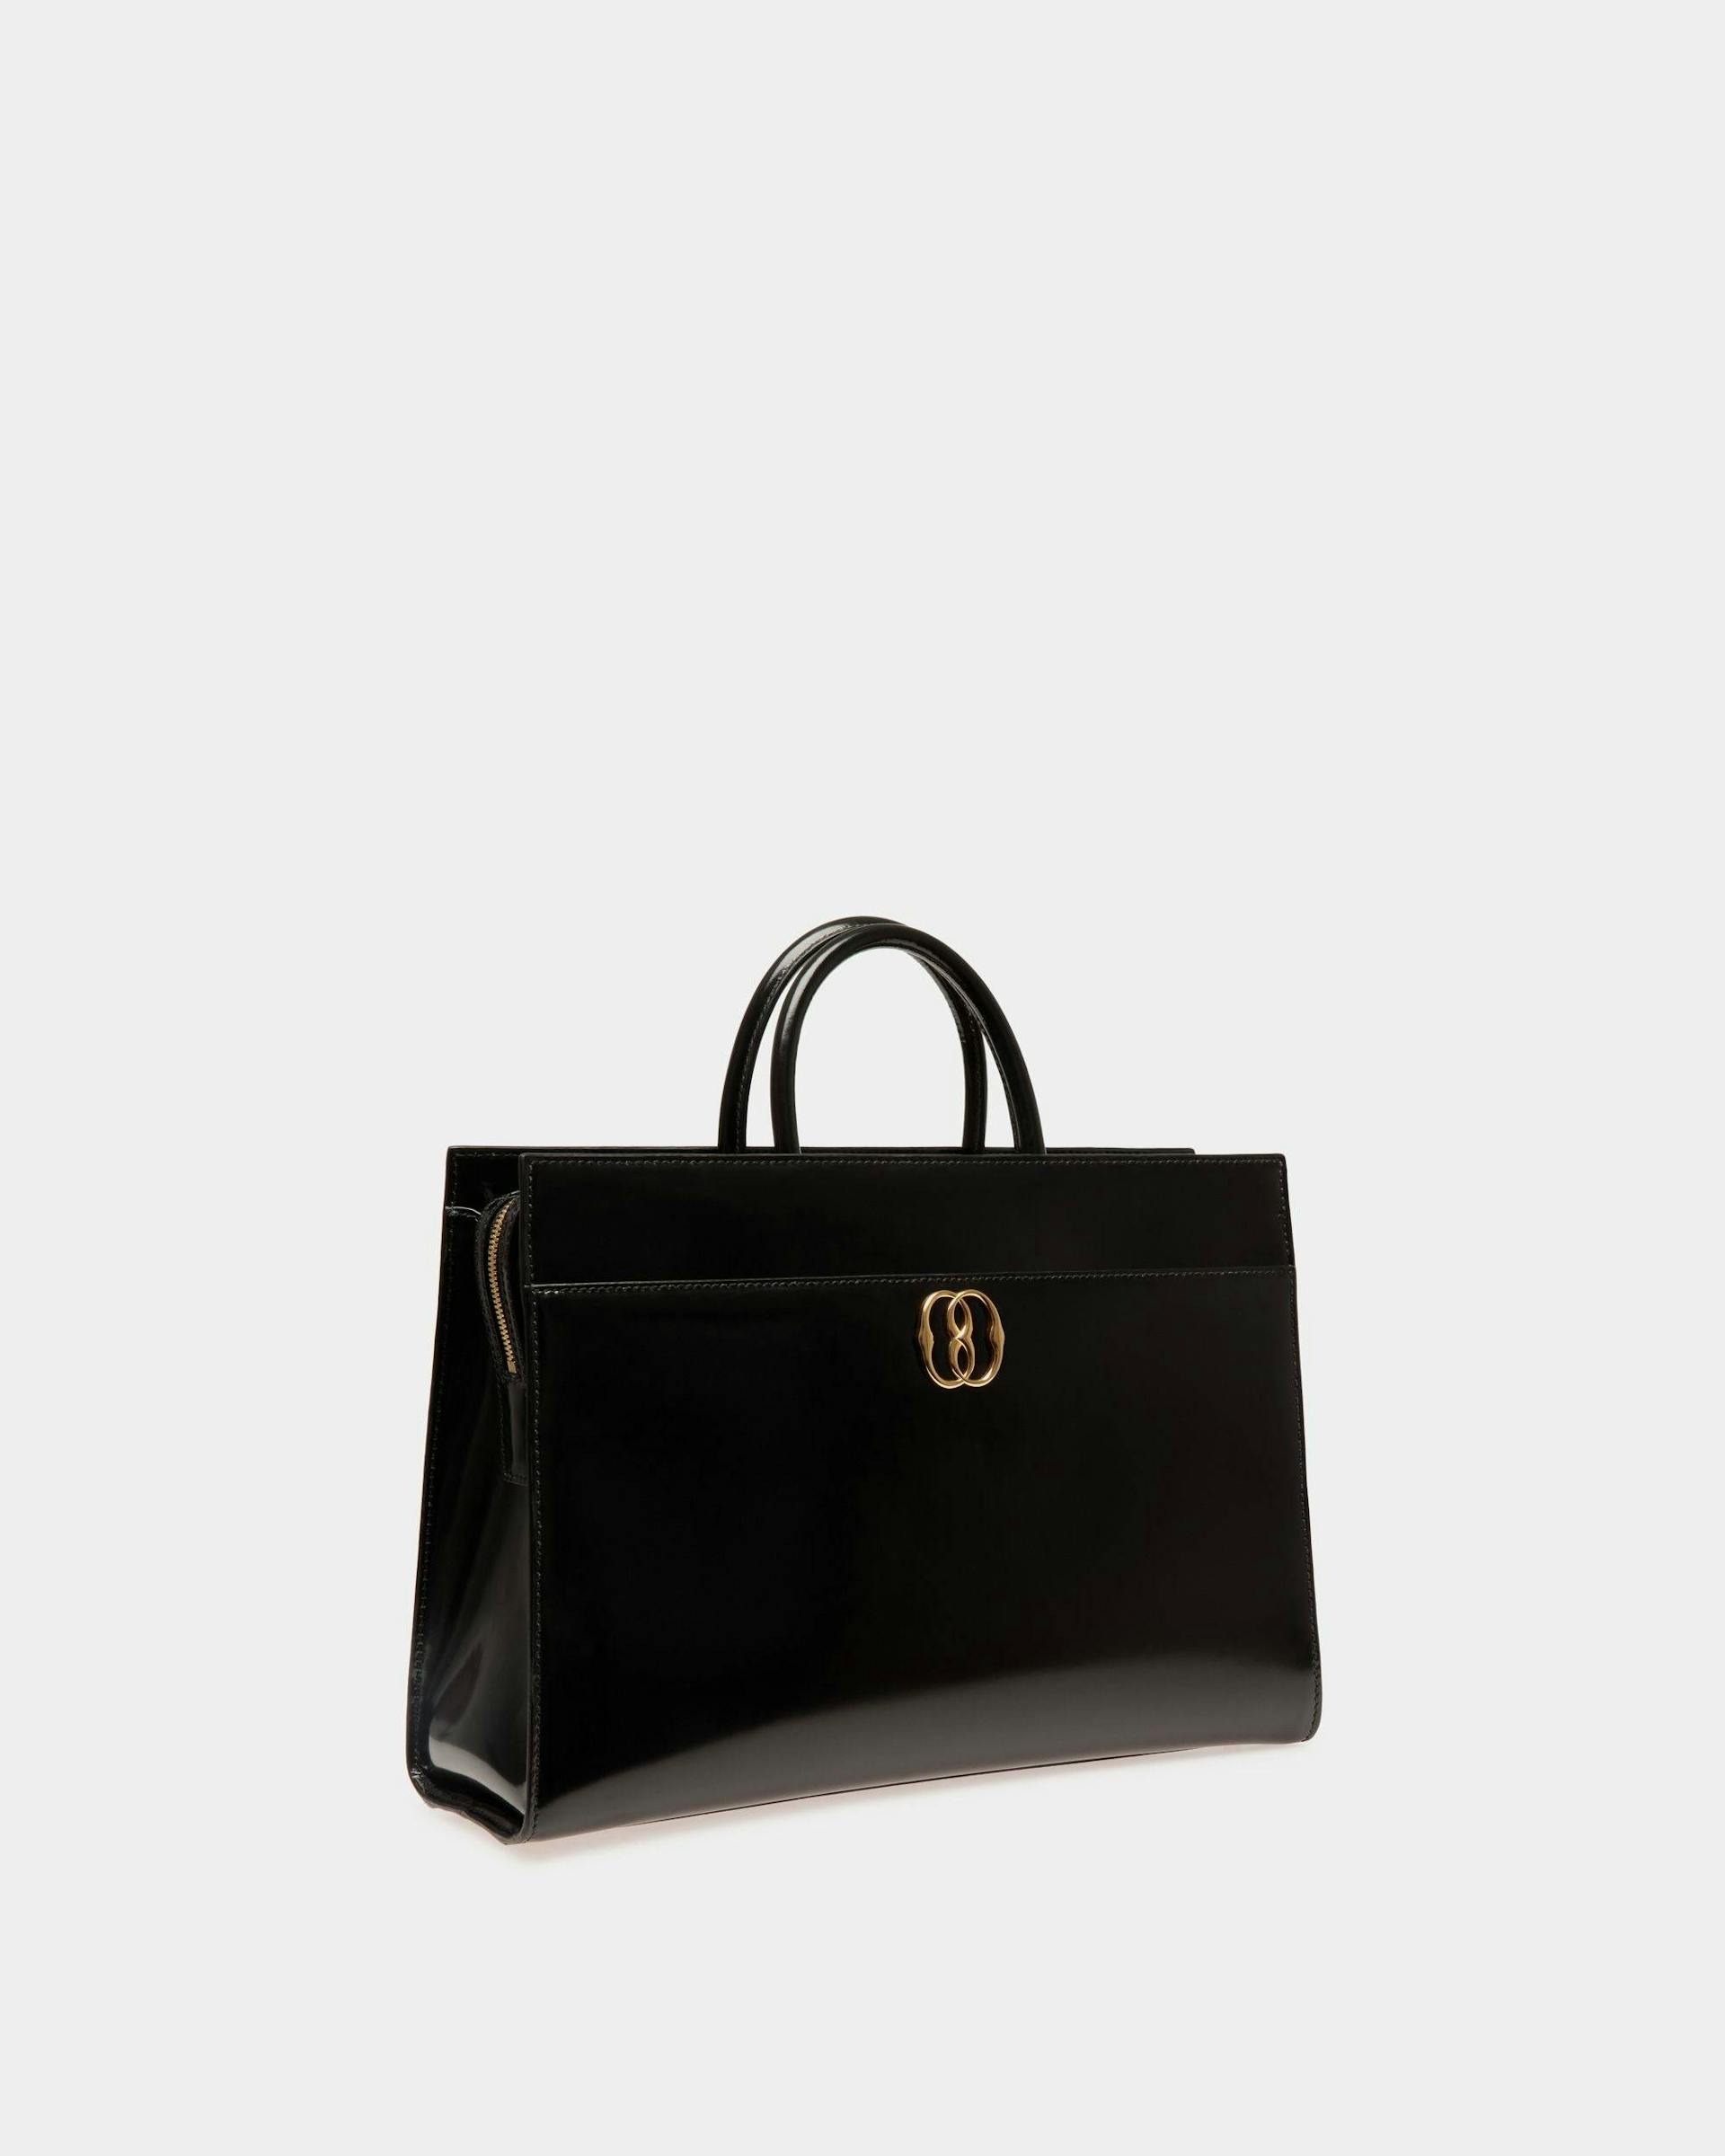 Women's Emblem Tote Bag In Black Patent Leather | Bally | Still Life 3/4 Front